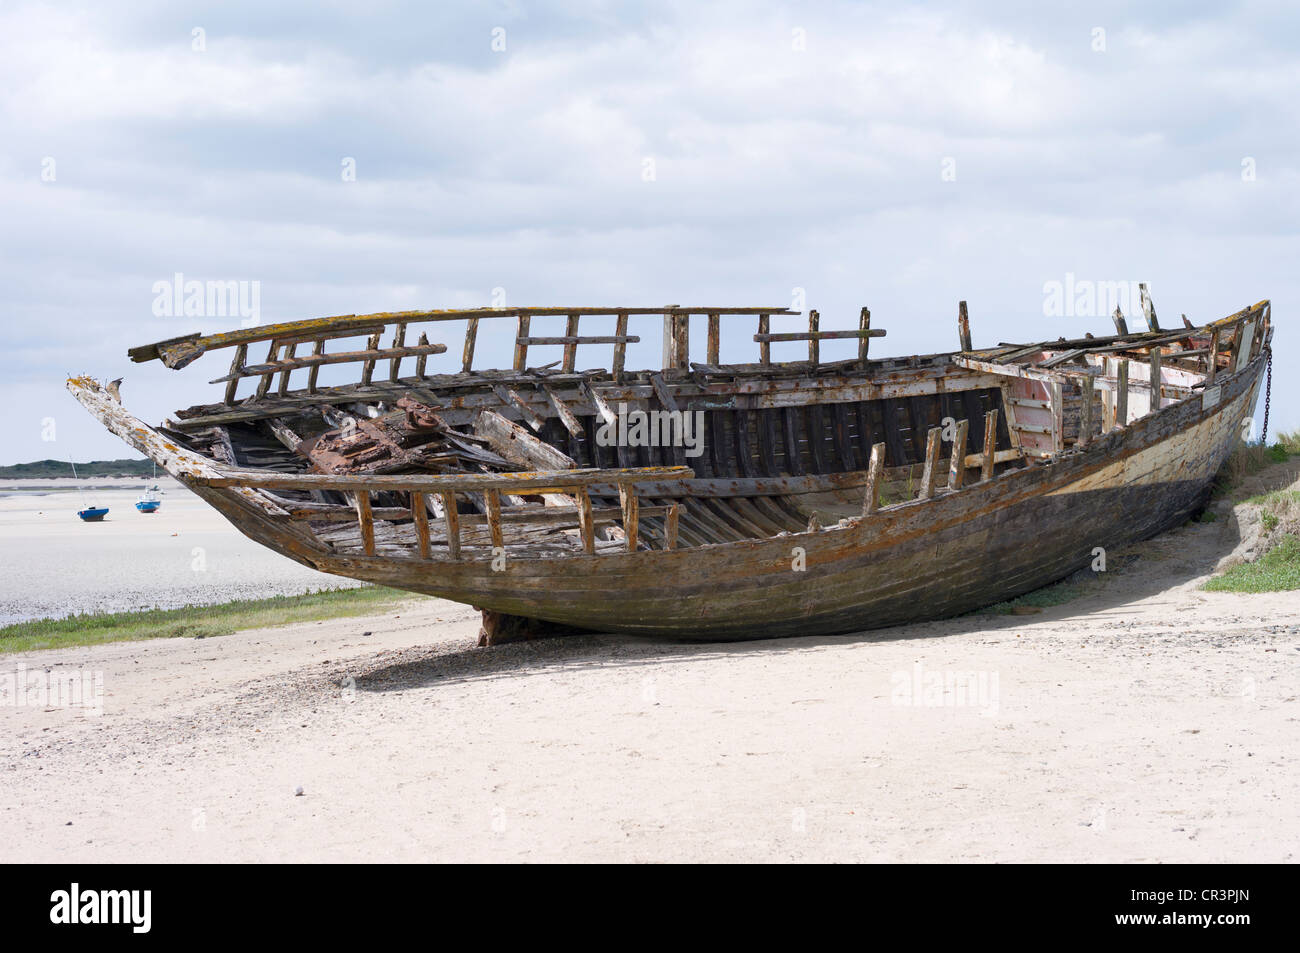 Wreck, wooden boat stranded on the beach Stock Photo